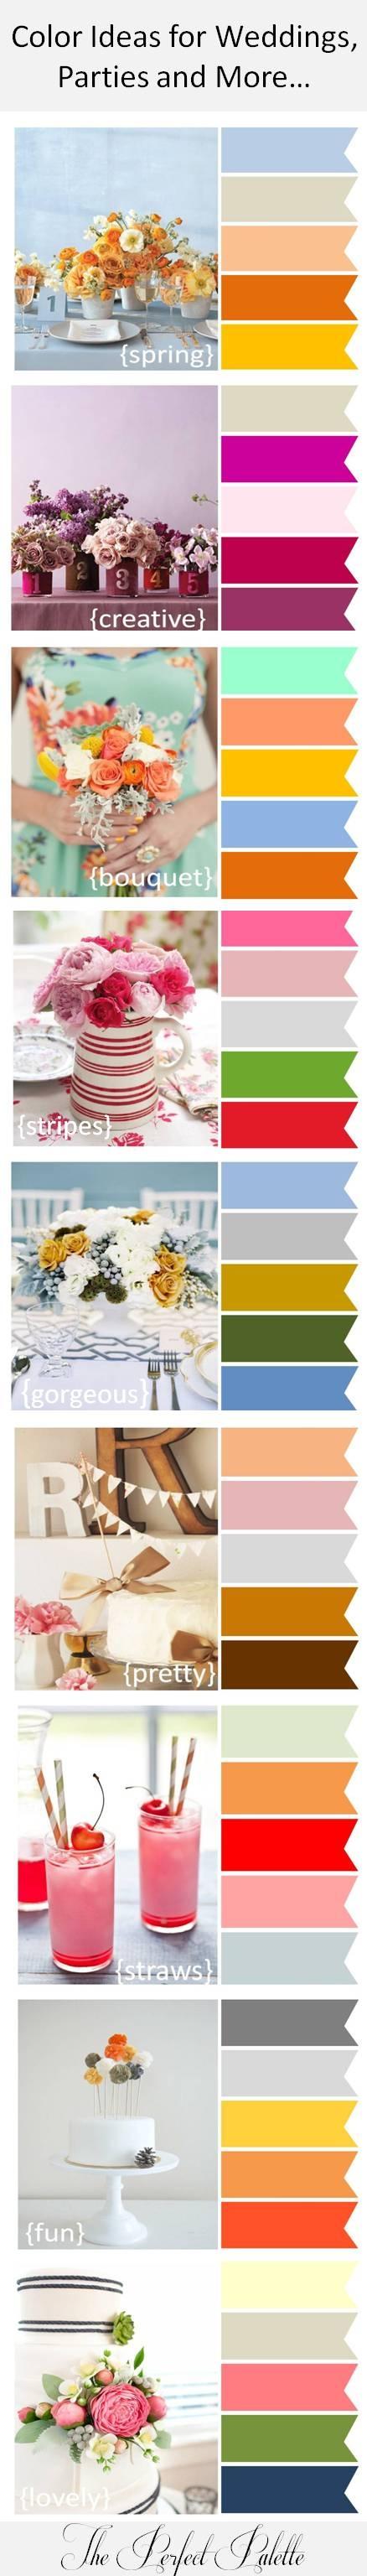 Wedding - Color Ideas For Weddings, Parties And More...